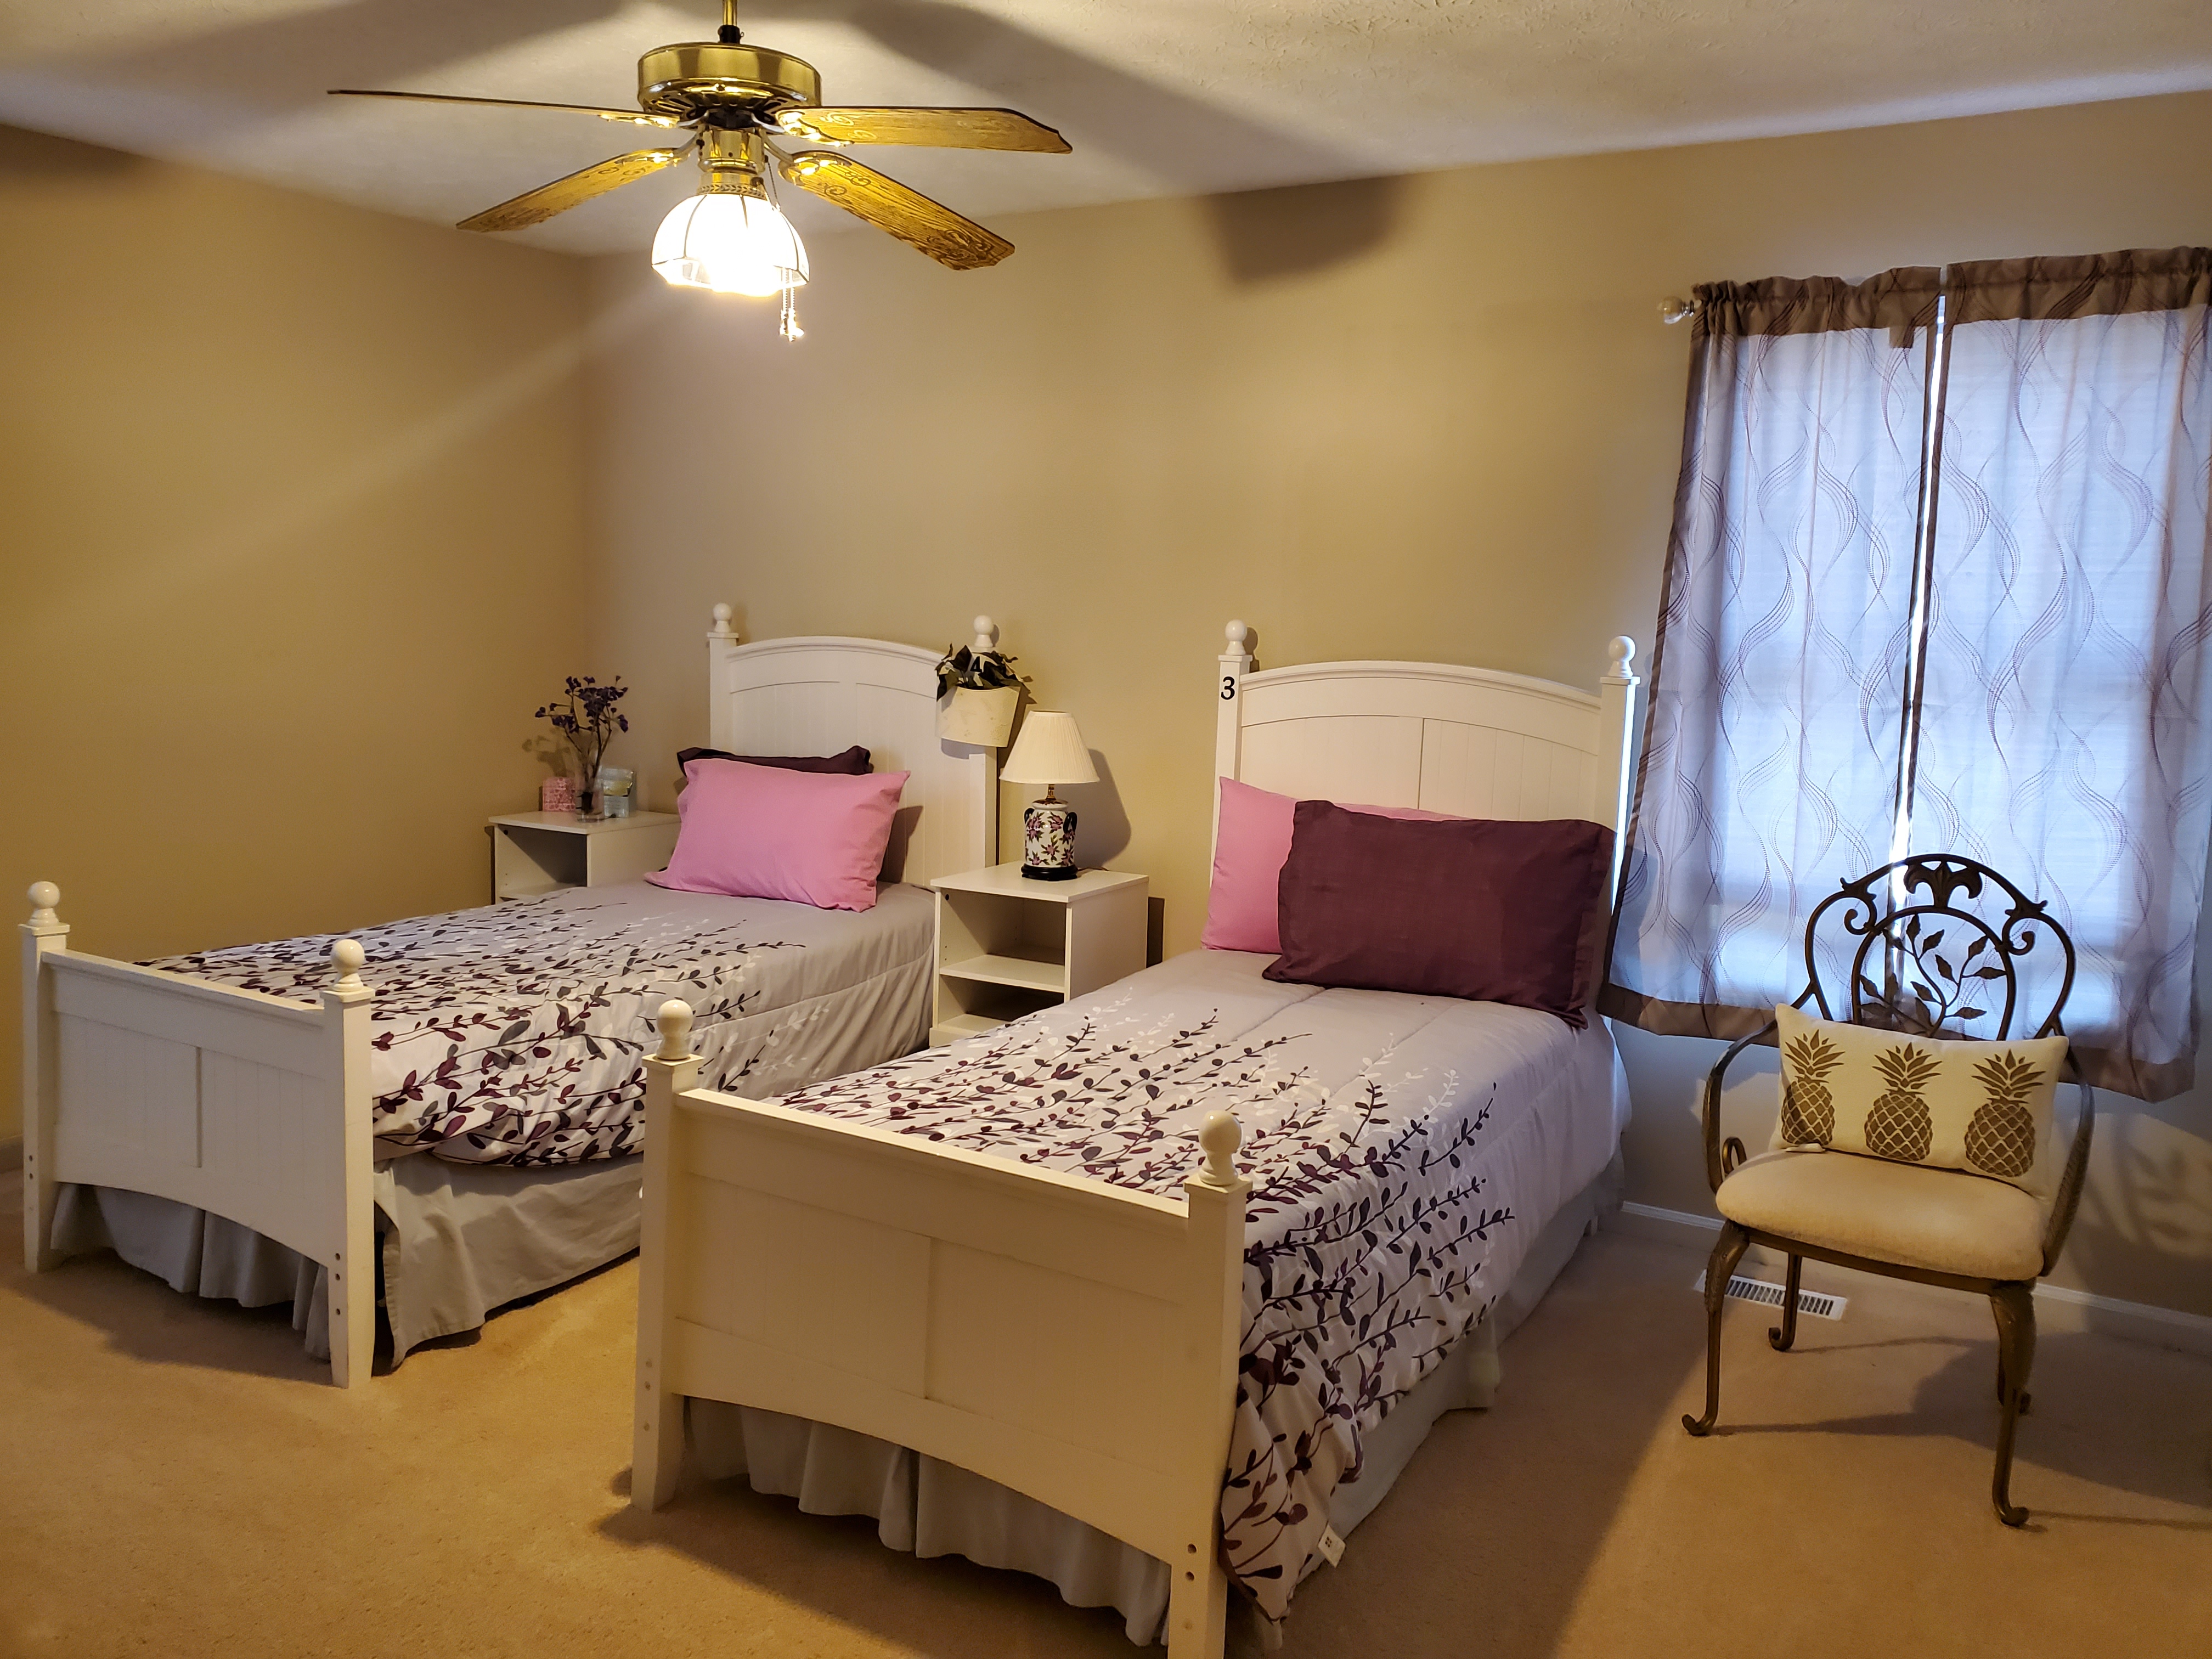 Peniston Personal Care Home, LLC image